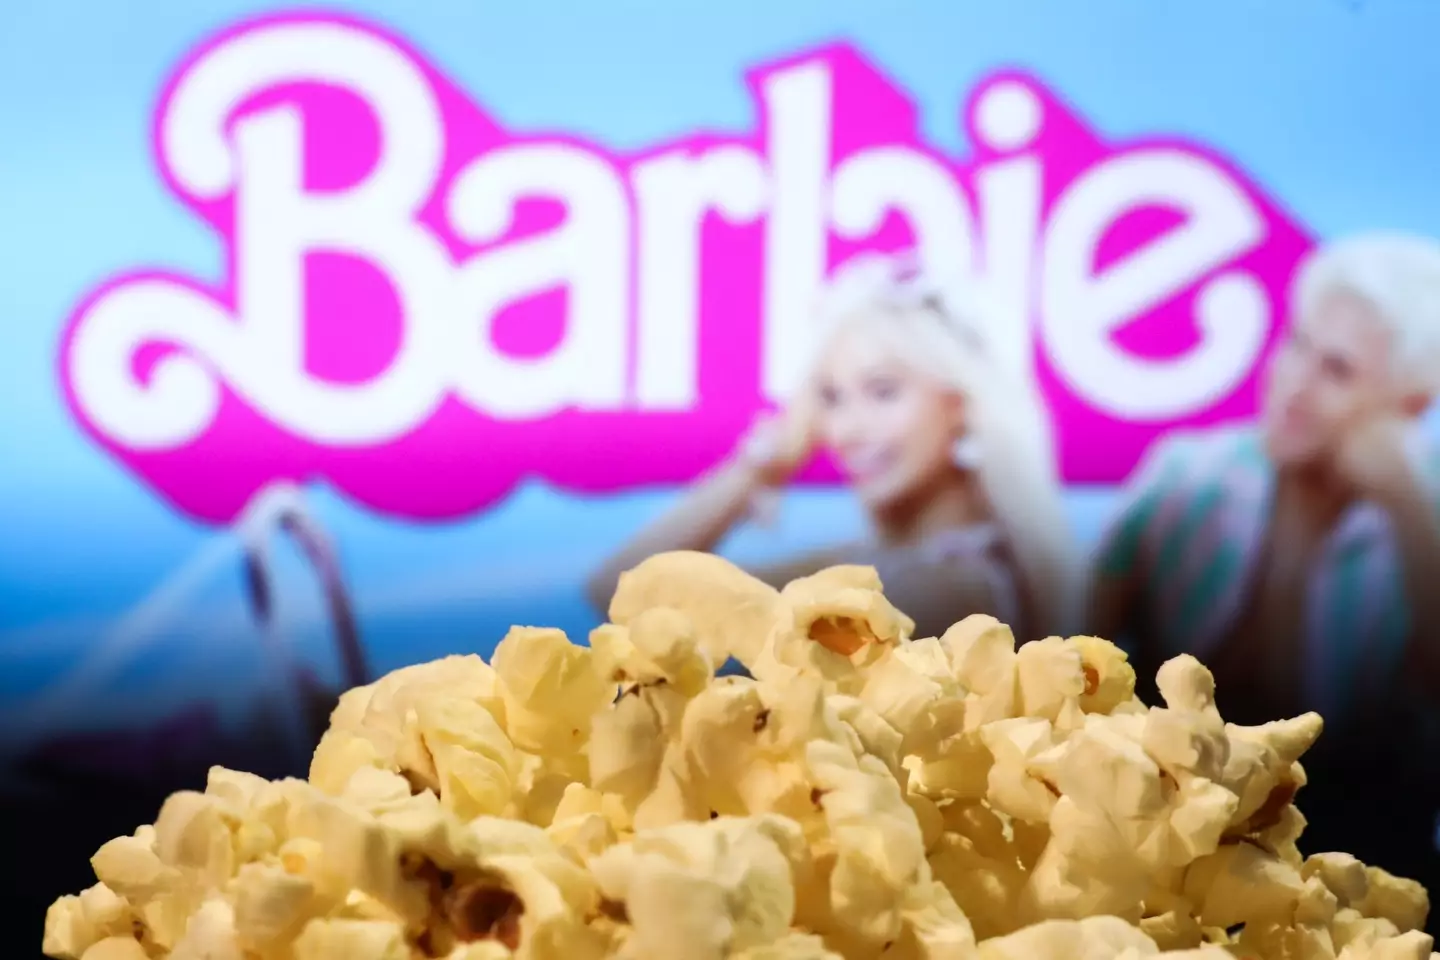 A 22-year-old man and his girlfriend were asked to swap seats so a mum and daughter could sit together for 'Barbie'.